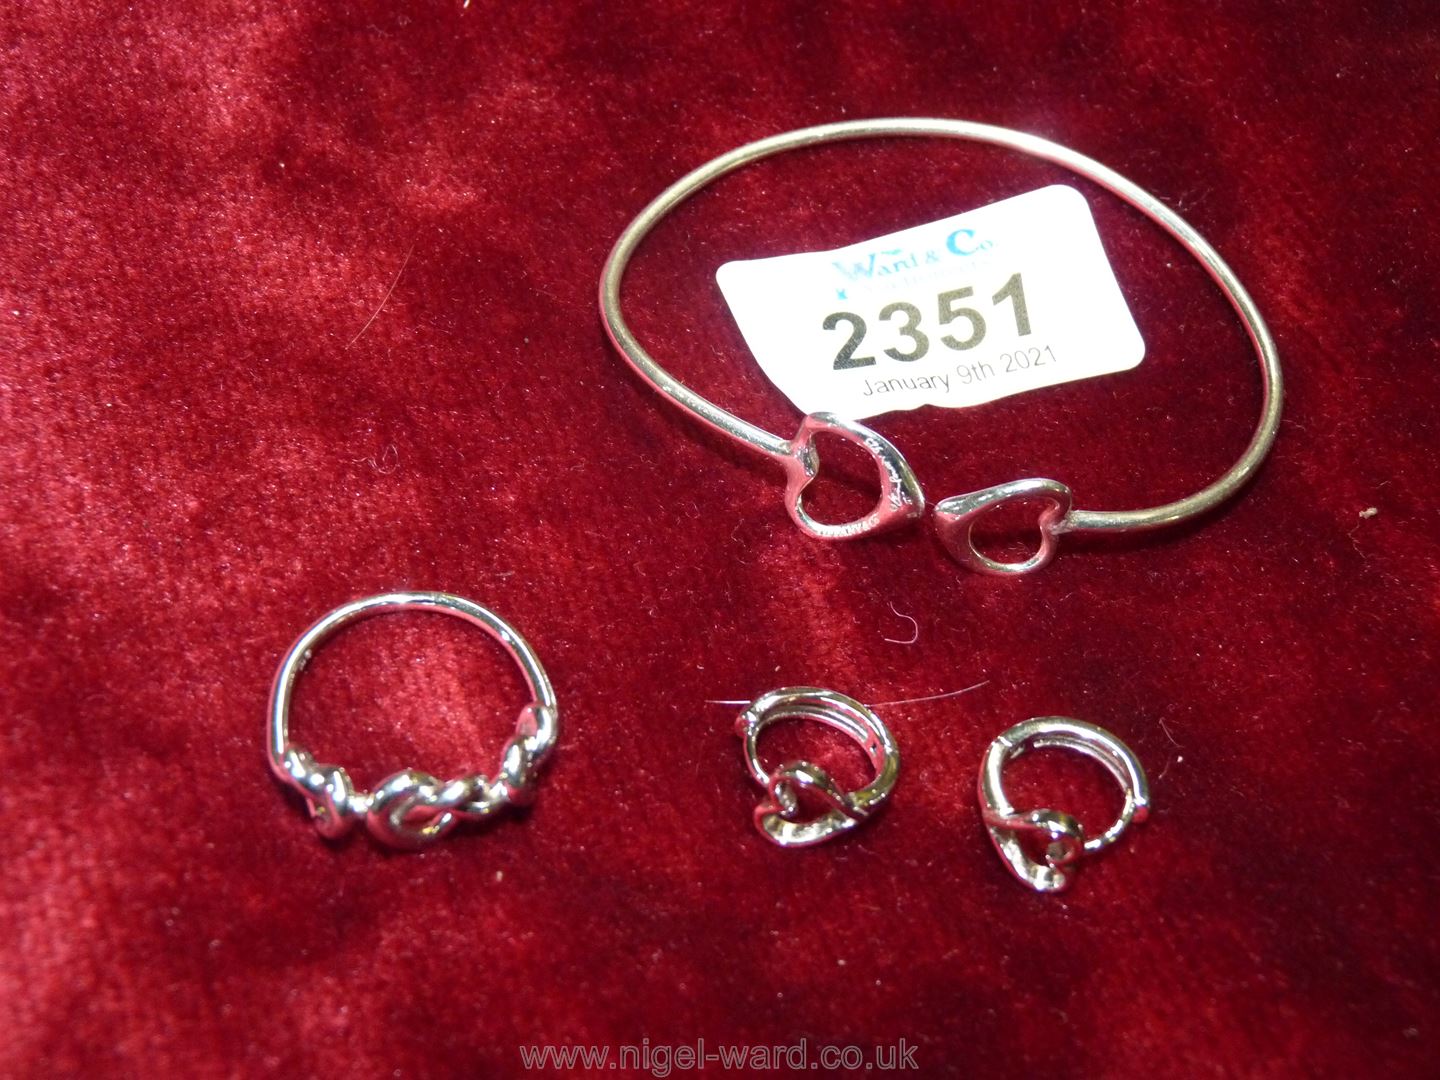 A 925 Bracelet, earrings and ring. - Image 2 of 2